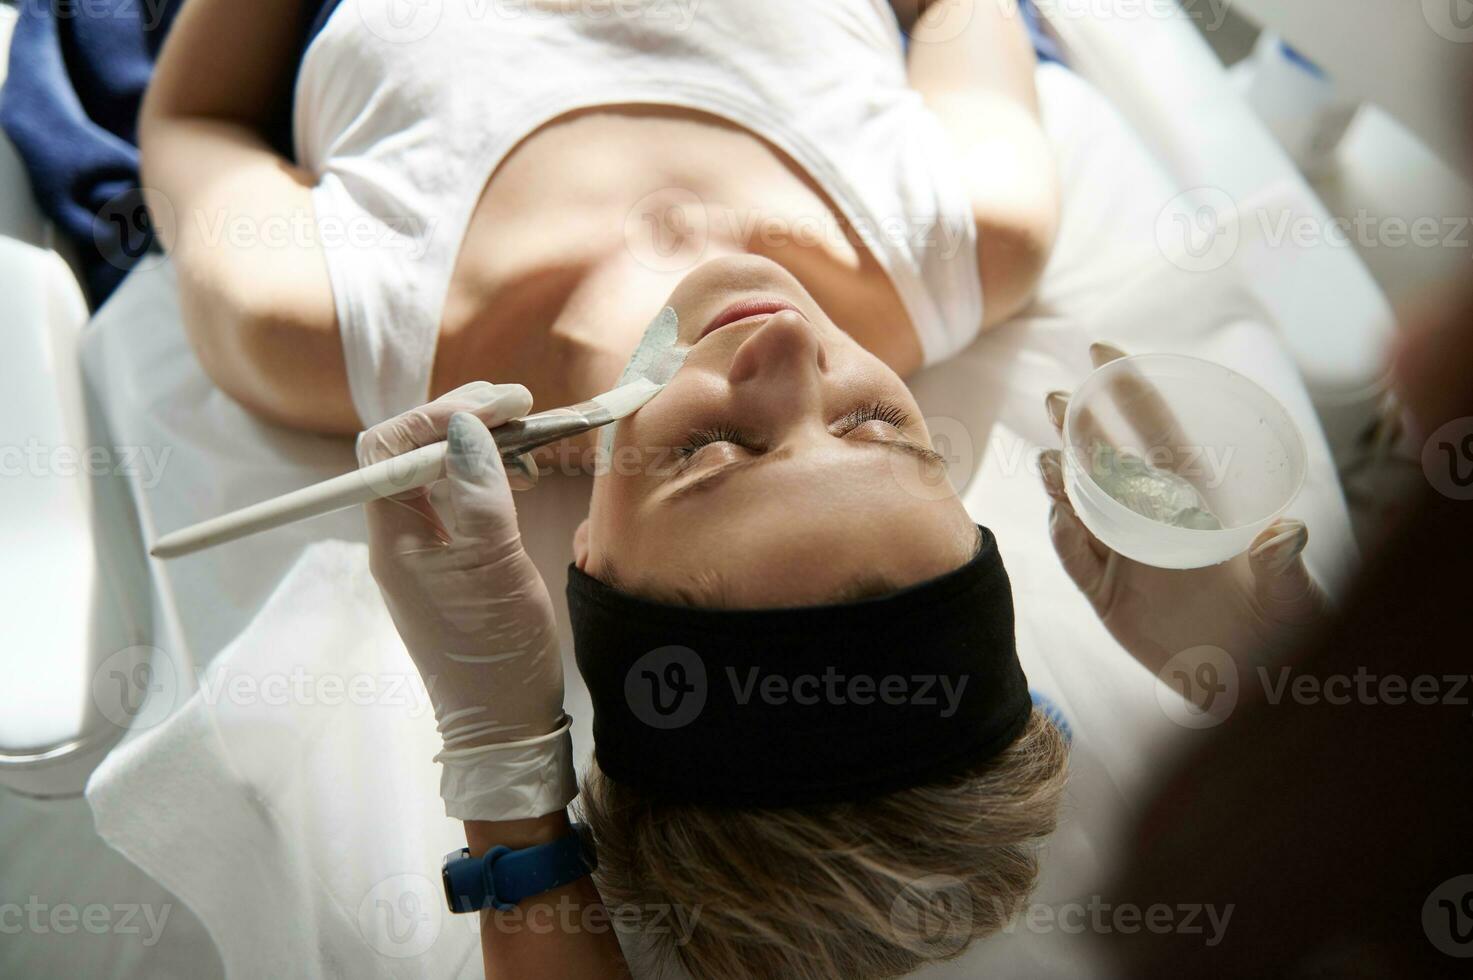 Overhead view of young woman relaxing on a massage table during beauty spa procedure and doctor cosmetologist applying alginate mask on her face photo